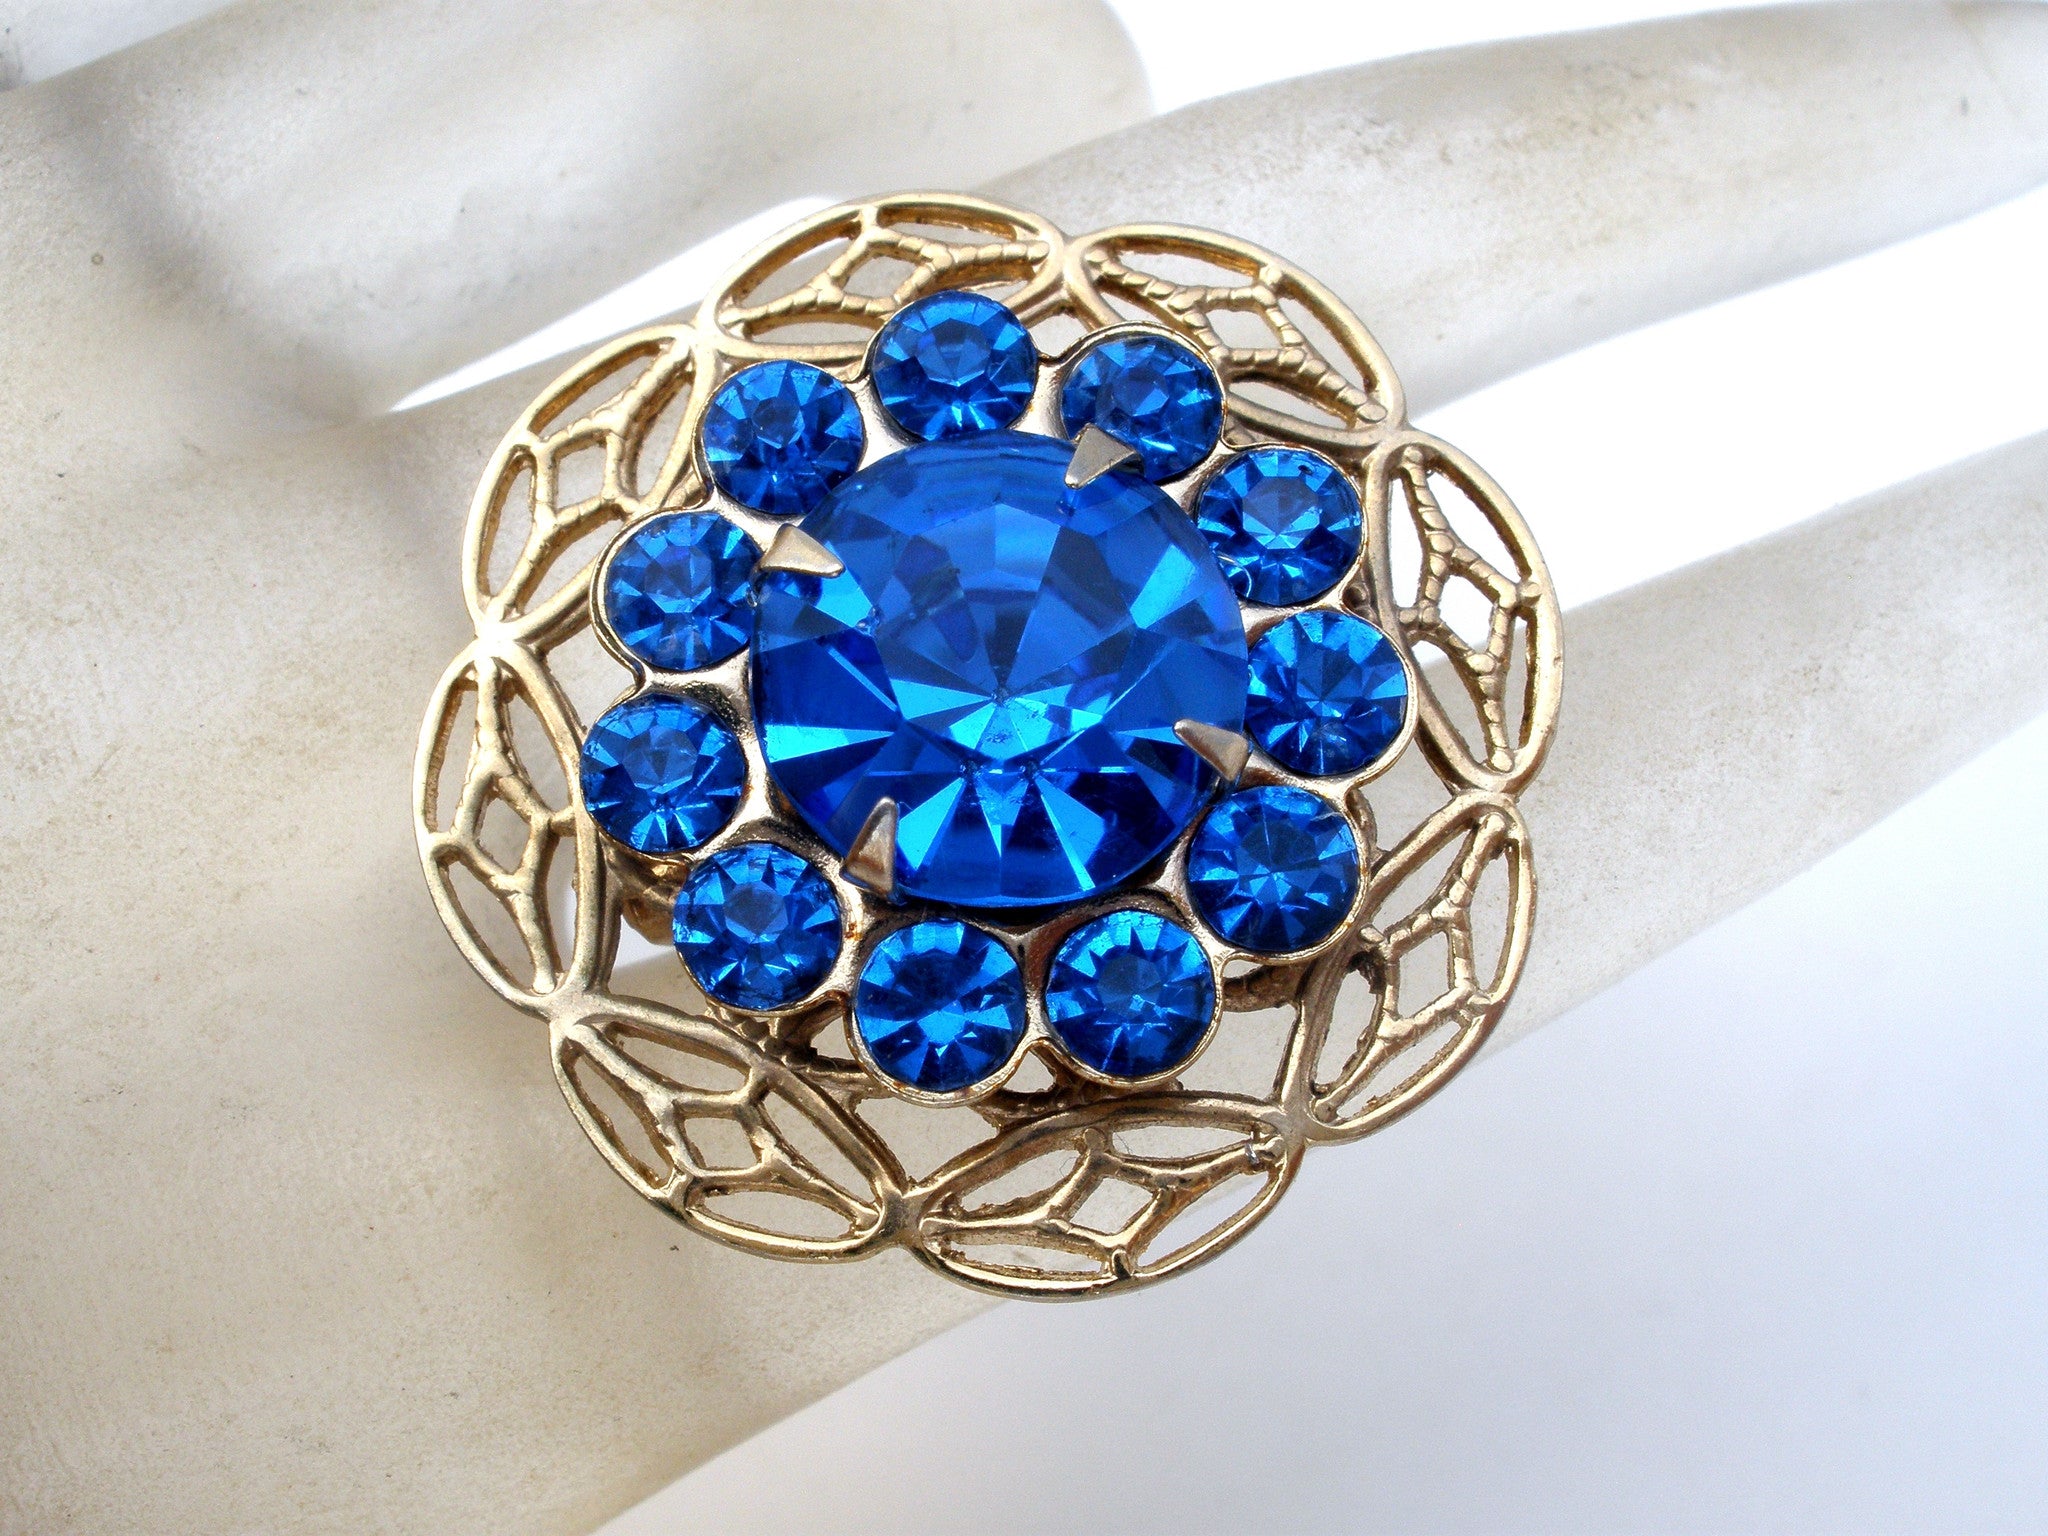 Sapphire Blue Rhinestone Brooch Pin Vintage The Jewelry Lady S Store